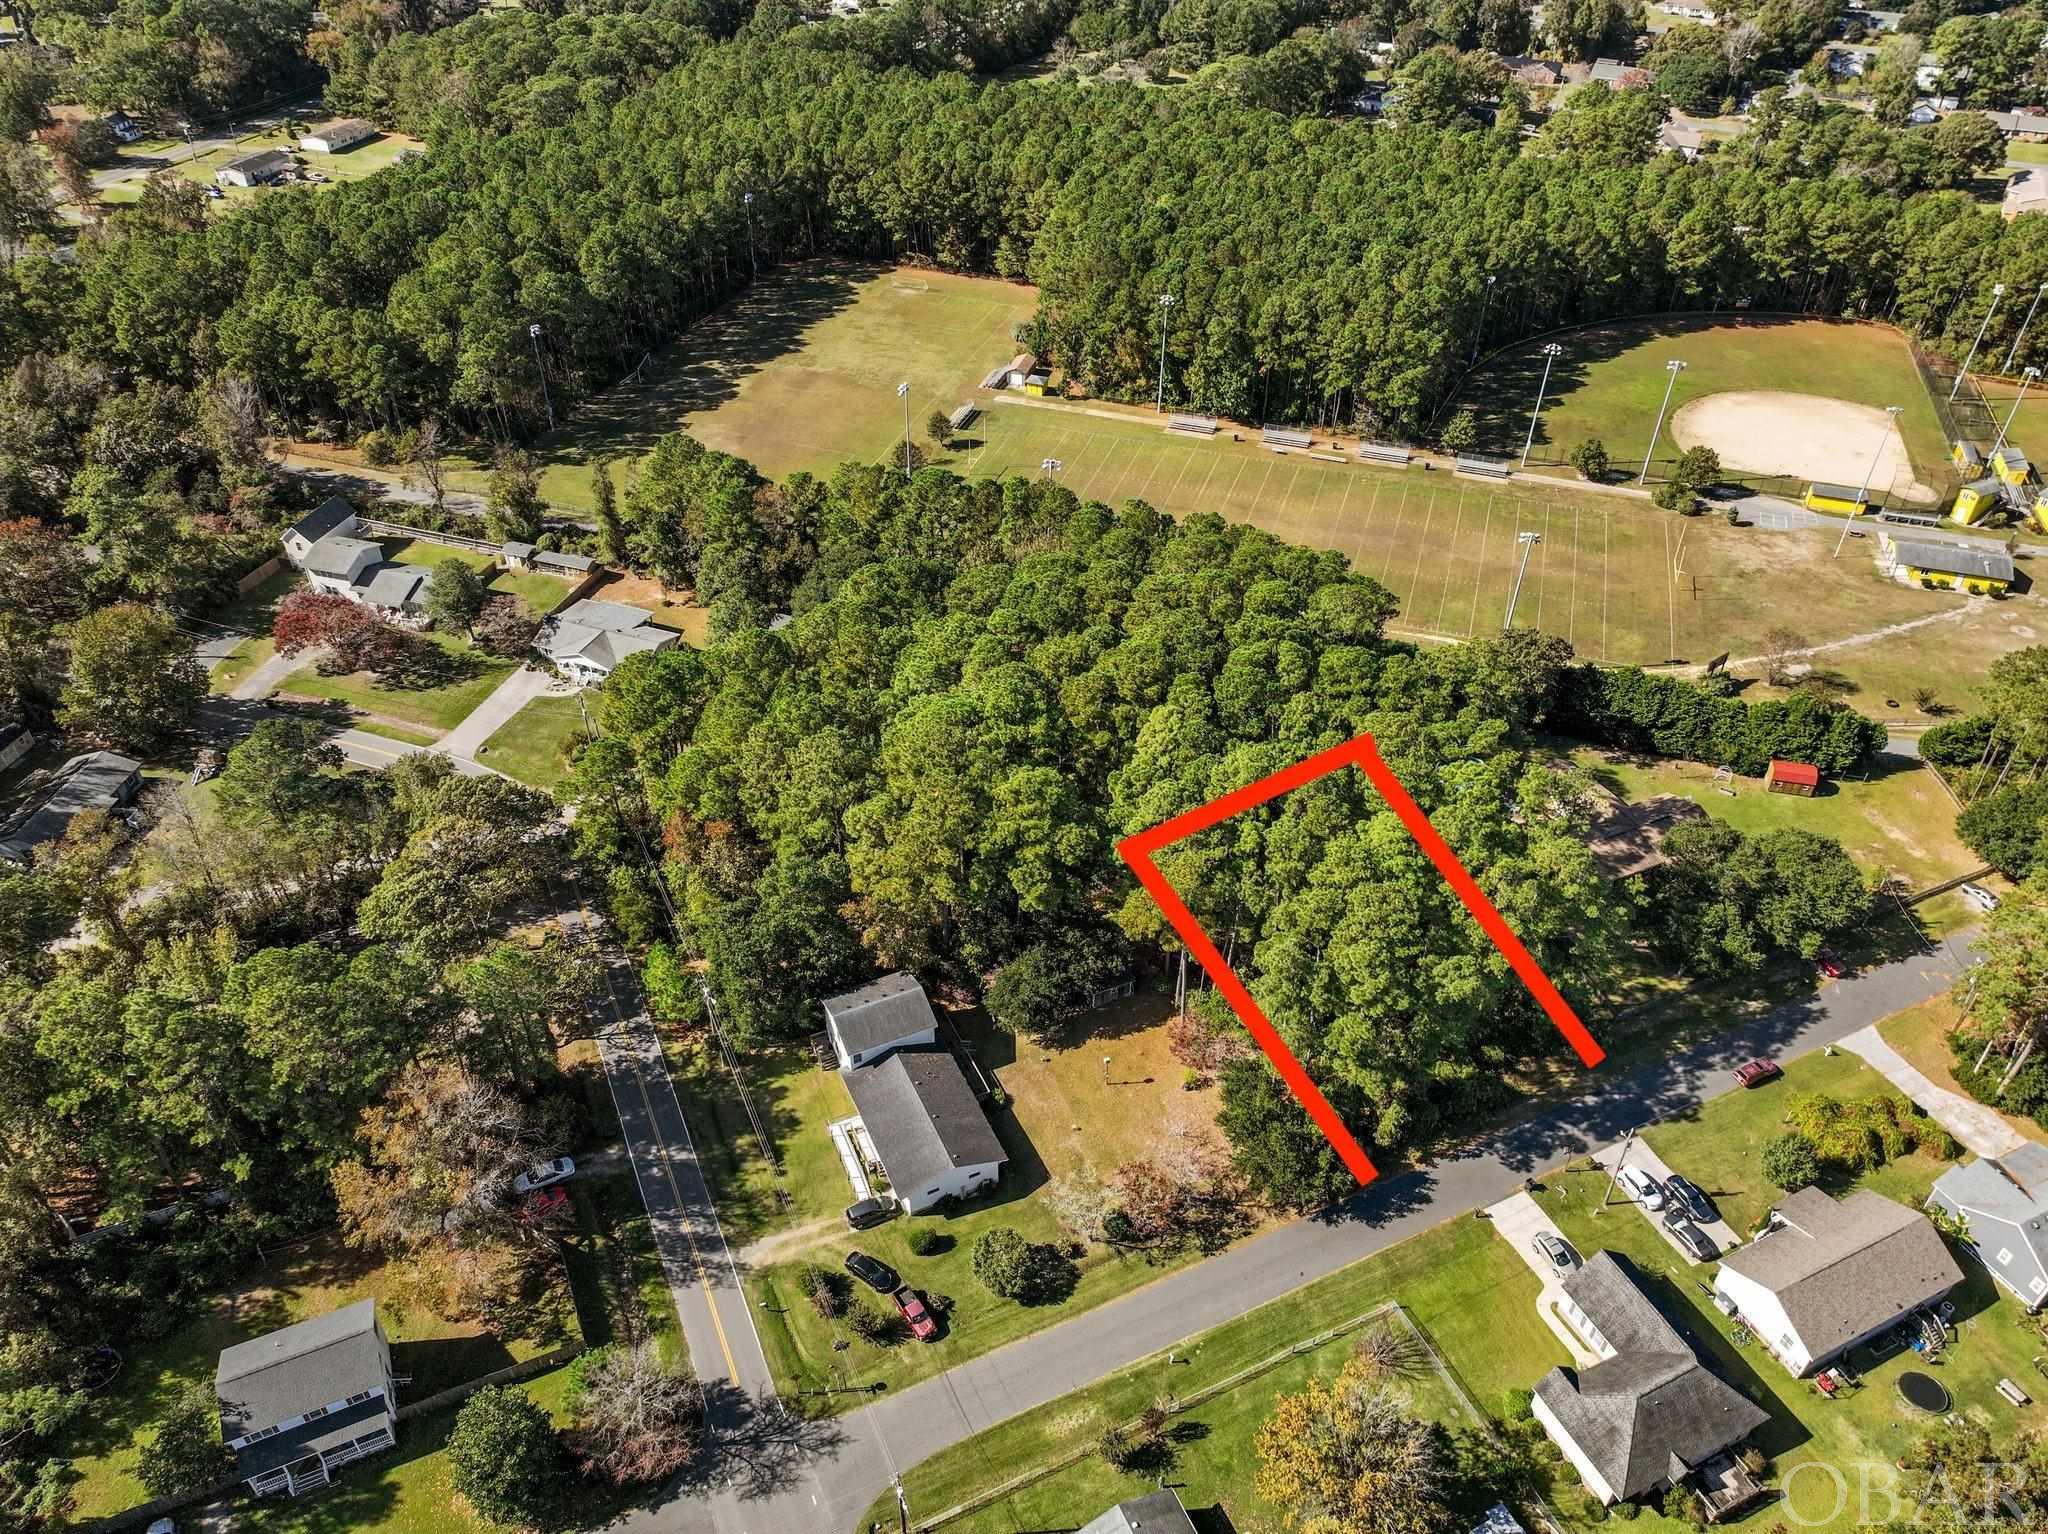 Located in the welcoming island town of Manteo on Roanoke Island, this undeveloped cul-de-sac (X flood zone) lot offers an opportunity for those seeking a piece of land in a picturesque waterfront town. The historic Manteo downtown area is within easy reach and features a marina, boardwalk, Roanoke Festival Park, community events and more.   The true appeal of this property lies in its strategic location near Manteo schools, making the daily school commute straightforward, and situated near local restaurants and shopping, ensuring that everyday essentials and dining options are always a short drive away.  Just minutes from Nags Head, a day at the ocean is just minutes away. With the potential to build your own home on this blank canvas, you have the opportunity to design a residence that perfectly suits your lifestyle. The ability to create a custom home in a residential neighborhood is a rare find, allowing you to shape your living space to meet your unique needs. Embrace the slow and quiet pace of this coastal town while enjoying a cul-de-sac setting with limited through traffic. This lot is a promising opportunity to craft your ideal island home and become a part of the Manteo community.